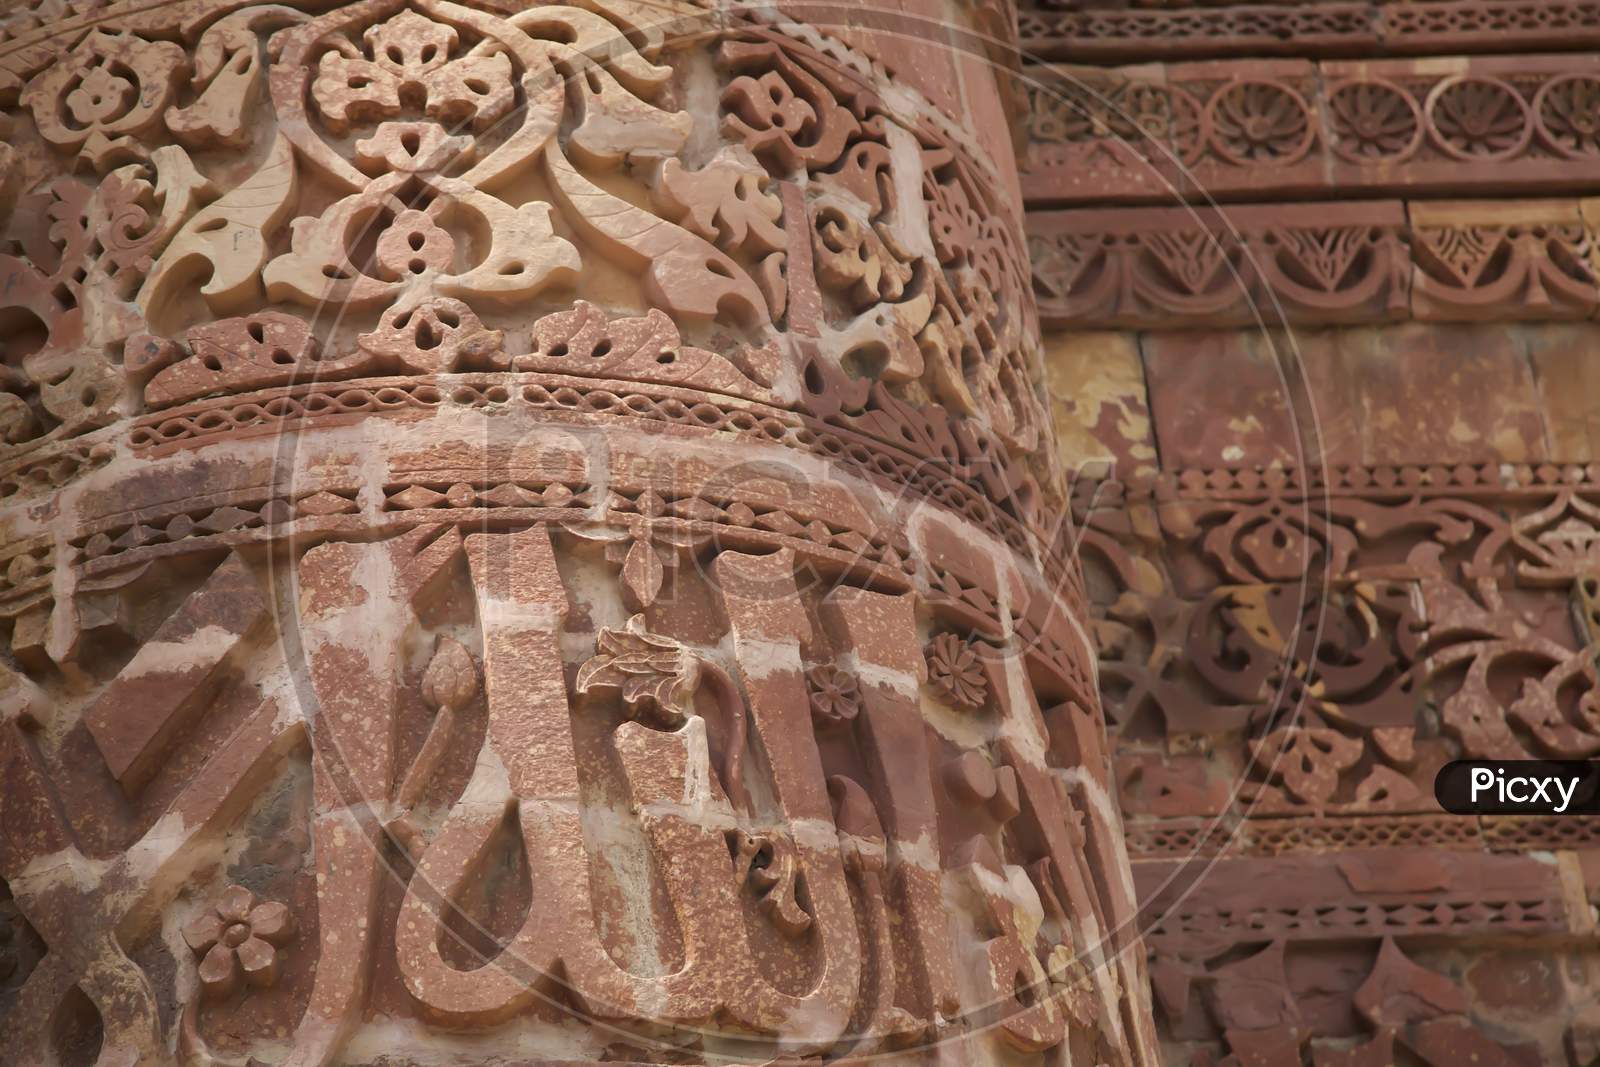 India Calligraphy Carved Into The Qutub Minar, Calligraphy And Patterns Are Beautifully Carved Into The Columns Of The Qutub Minar